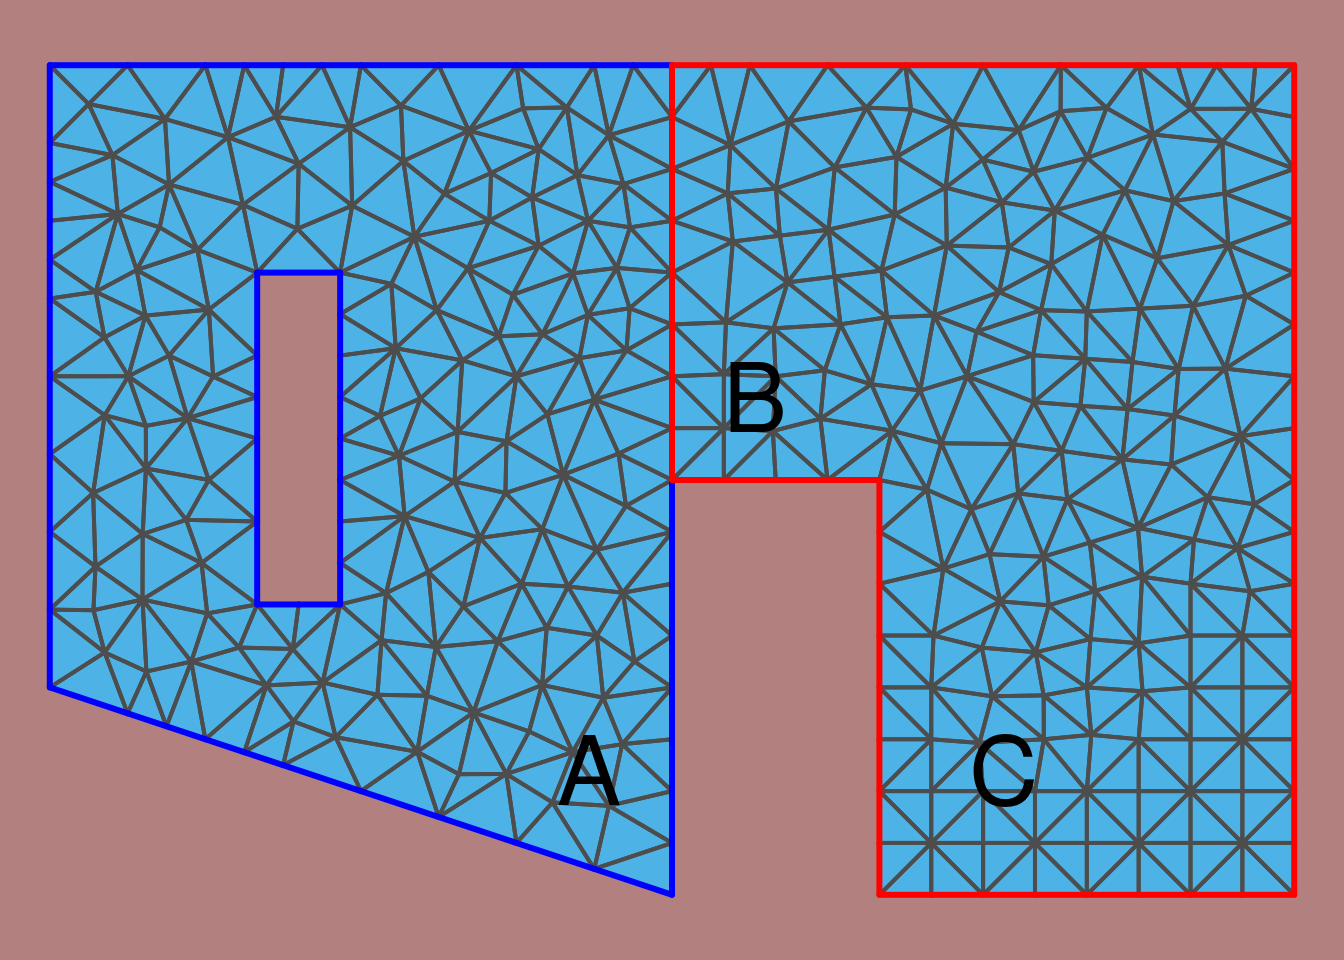 Triangulation with hole and a non-convex region.